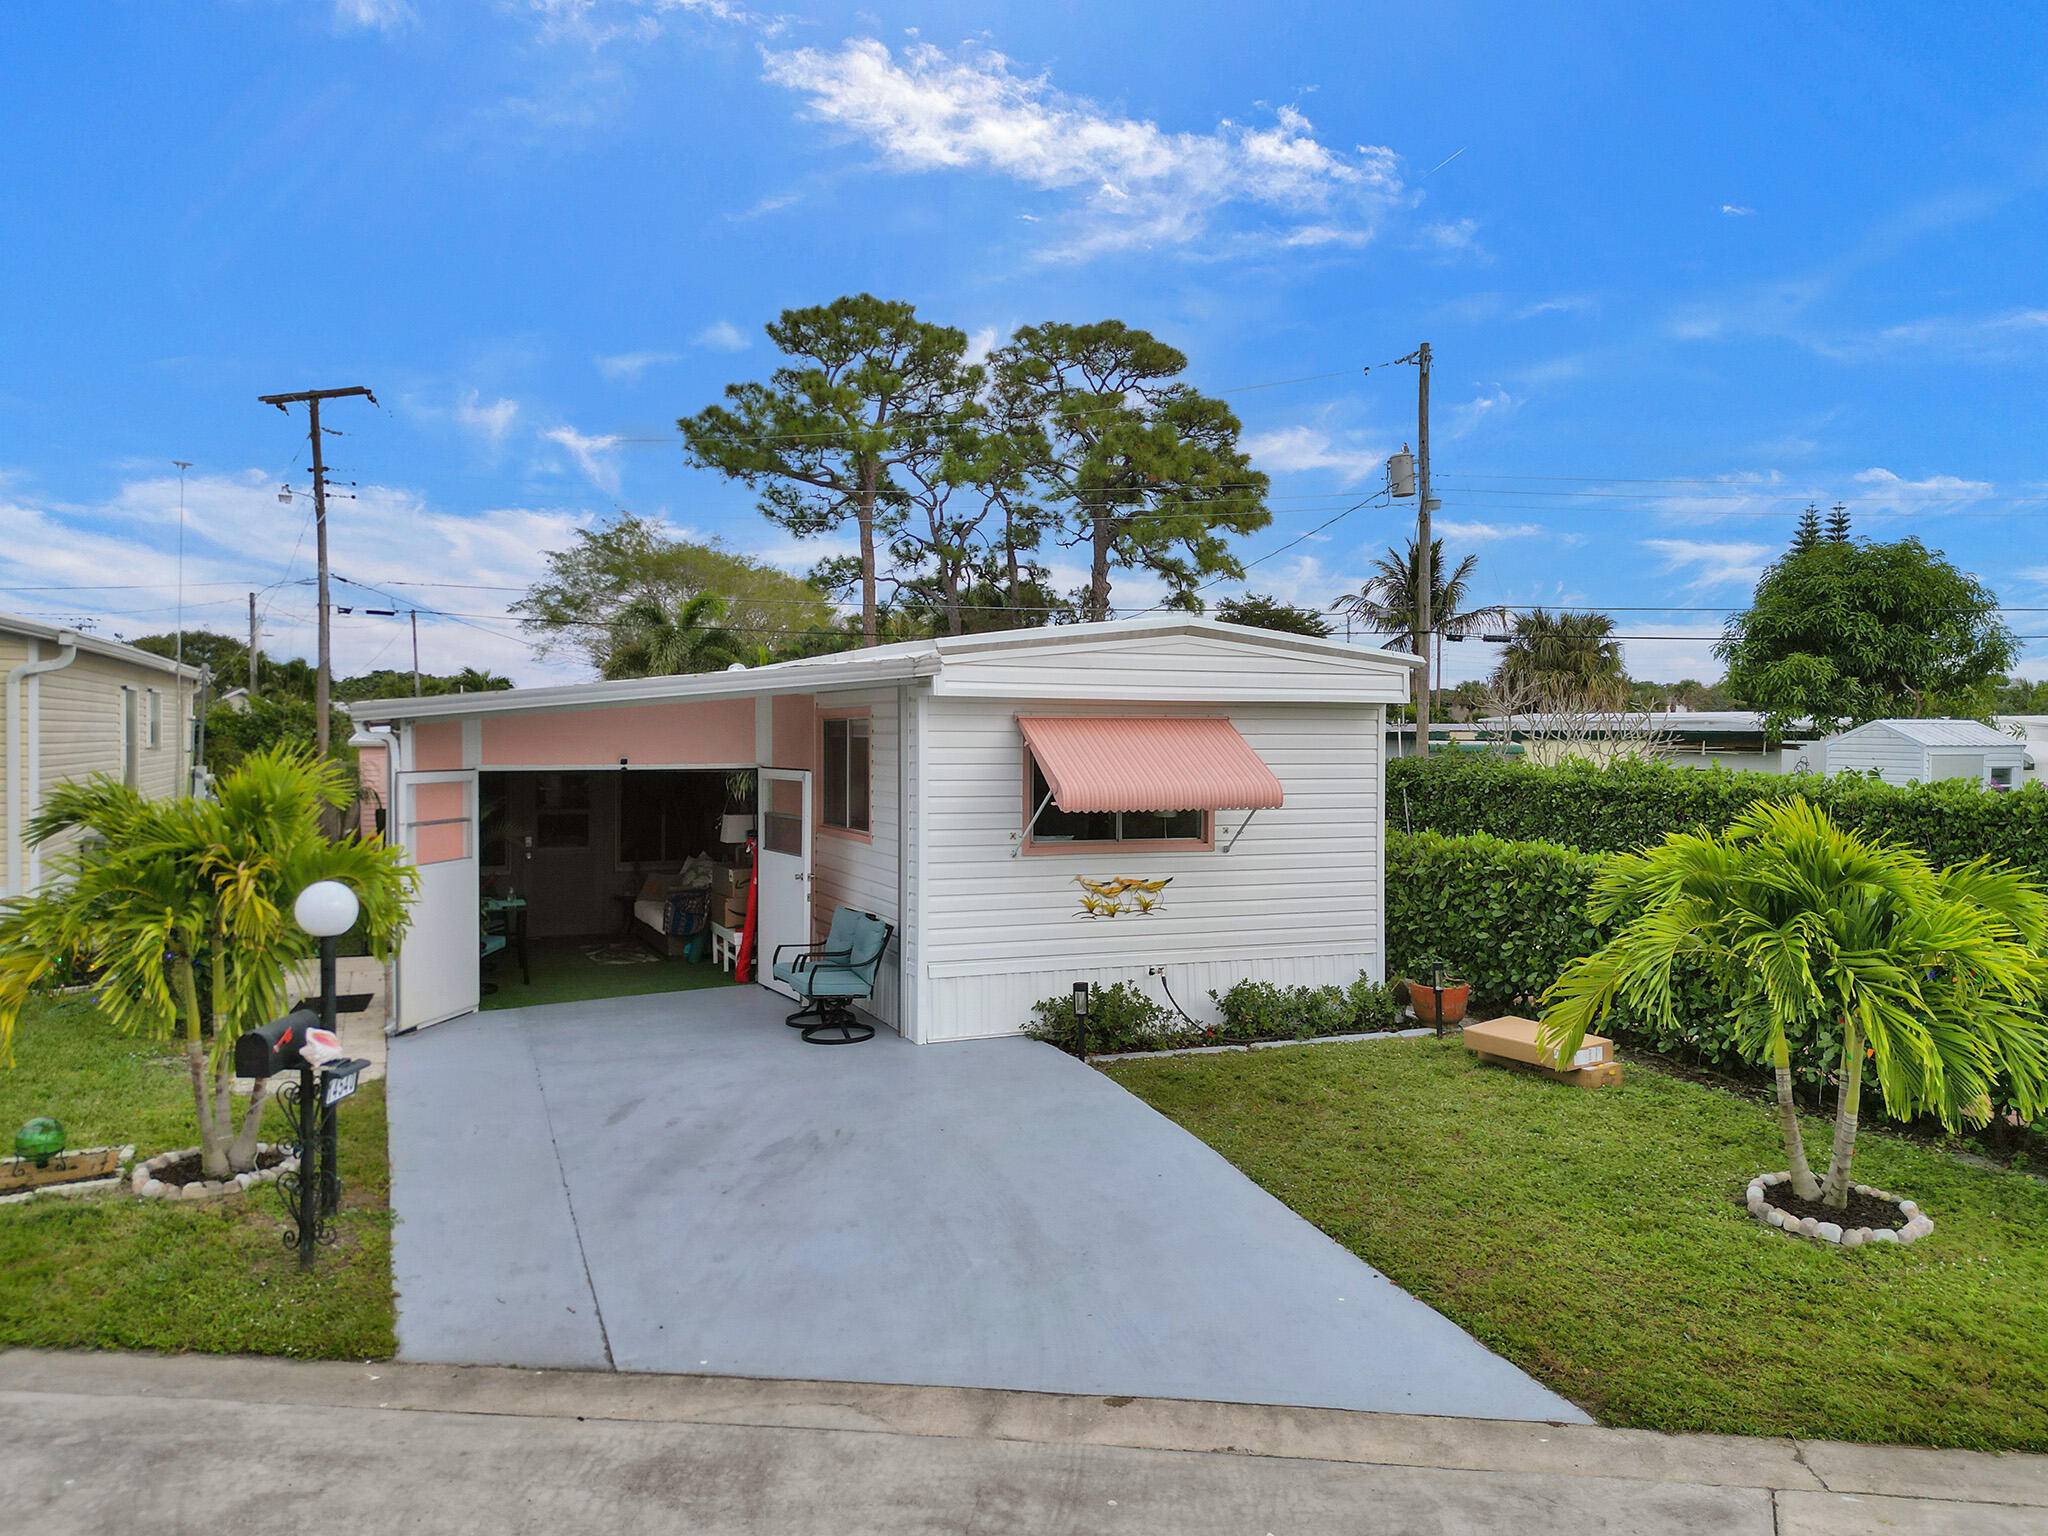 WELCOME HOME TO THIS KEY WEST STYLE COMPLETELY UPGRADED FRUNISHED PROPERTY INCLUDES THE LAND.